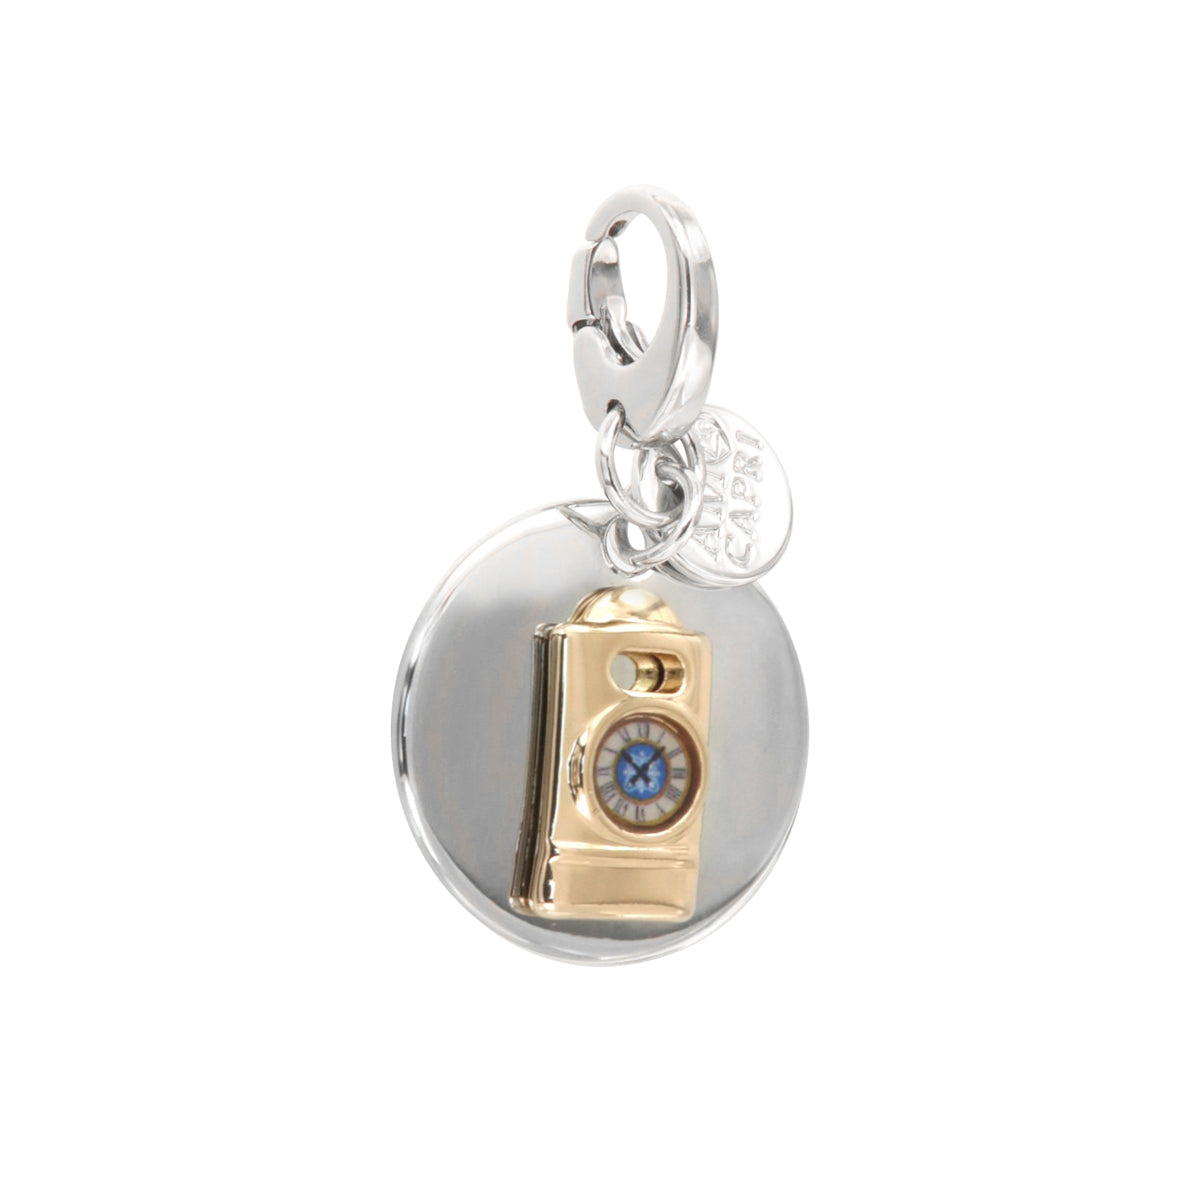 Metal pendant medallion with Capri watch tower symbol, with colored glazes